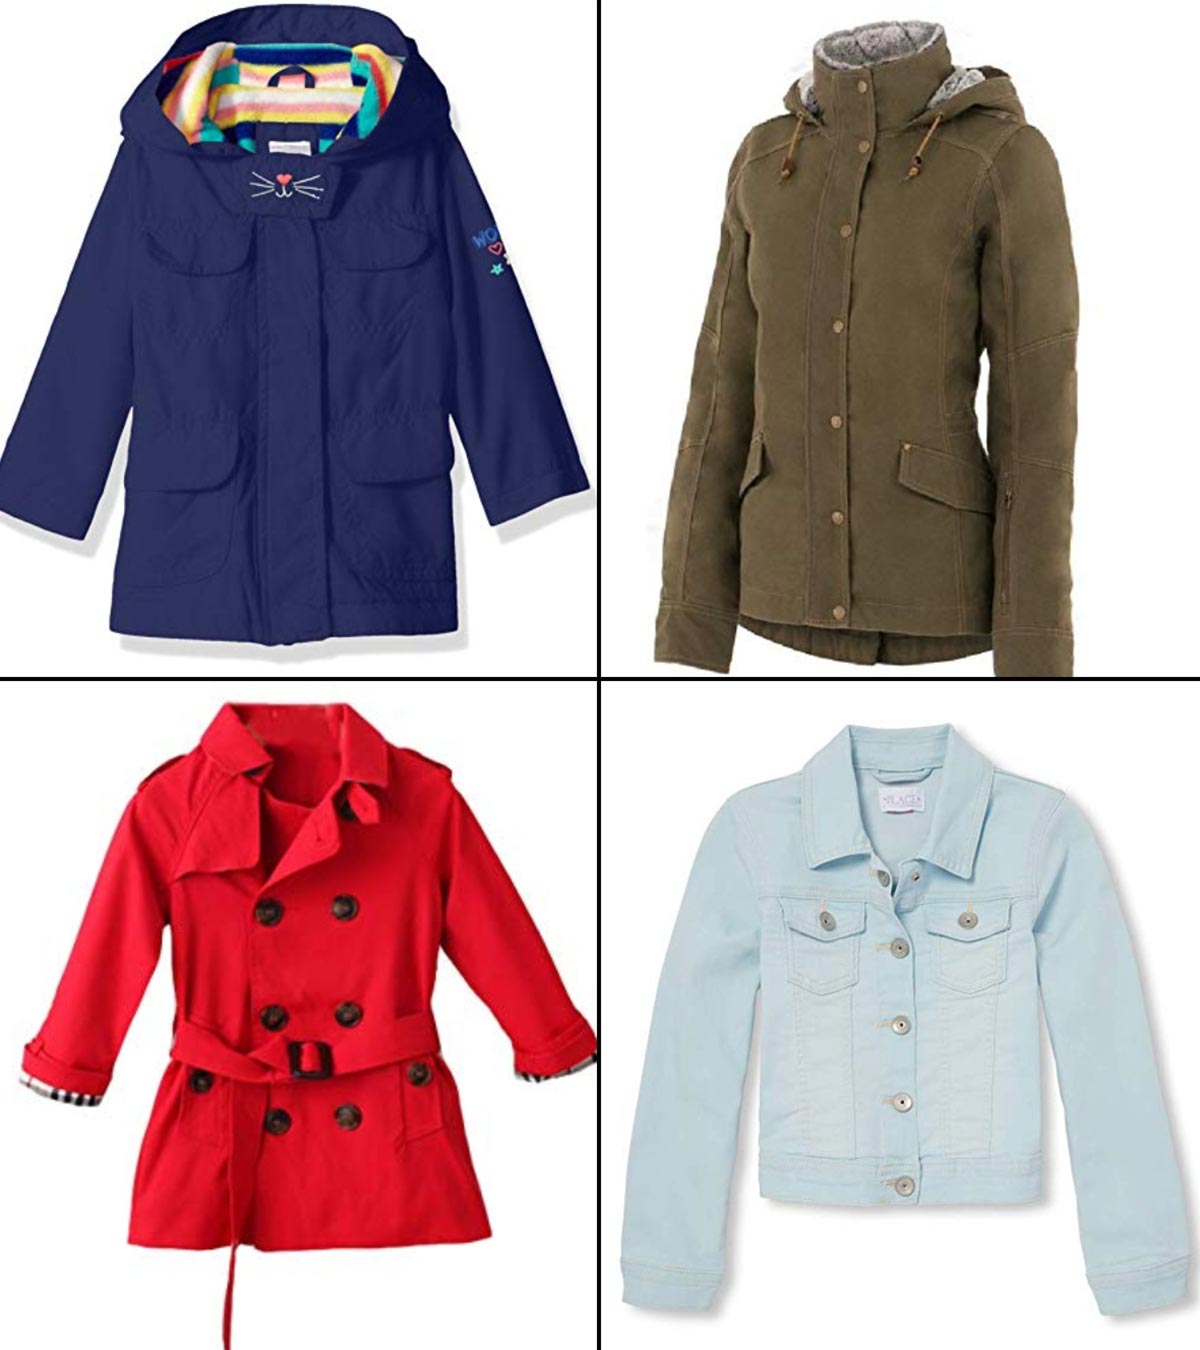 15 Best Jackets To Buy For Girls In 2022